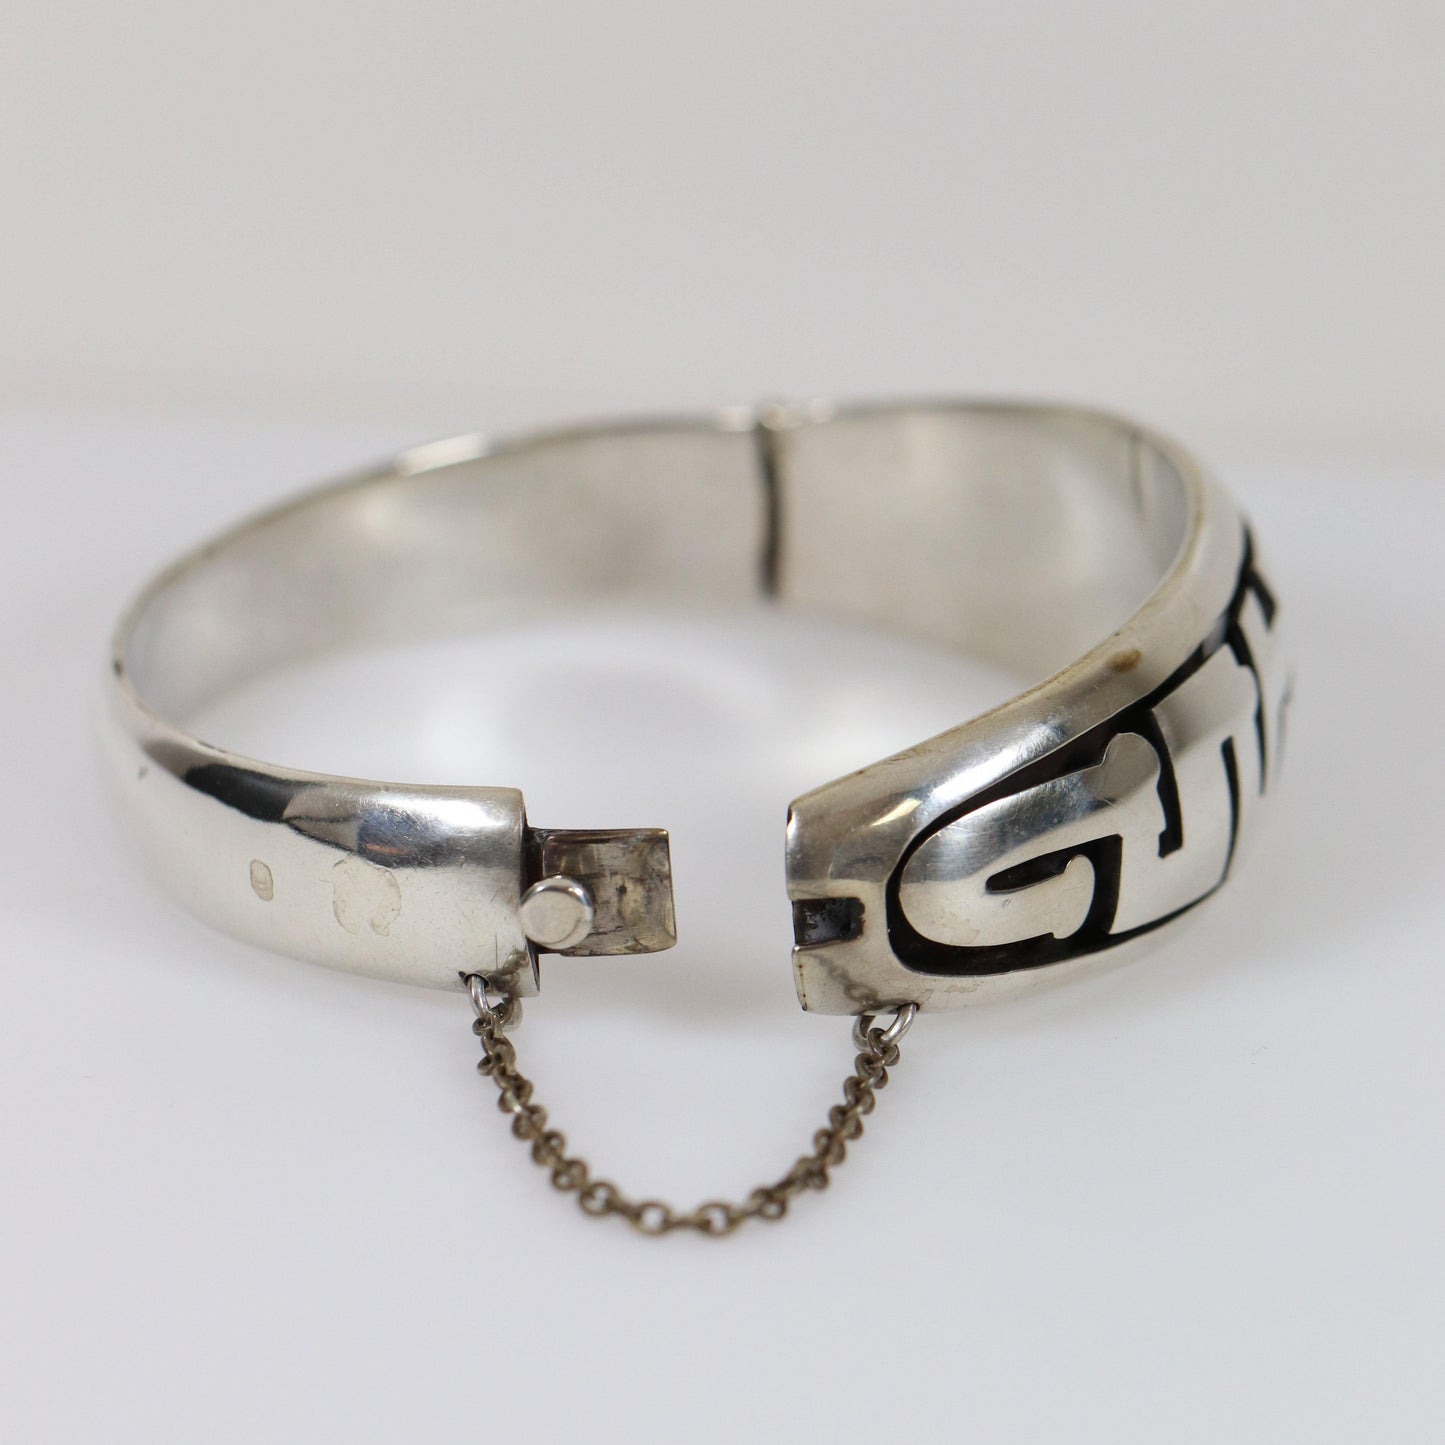 Vintage Silver Mexican Jewelry | Tribal Hinged Handcrafted Bracelet with Safety - Carmel Fine Silver Jewelry